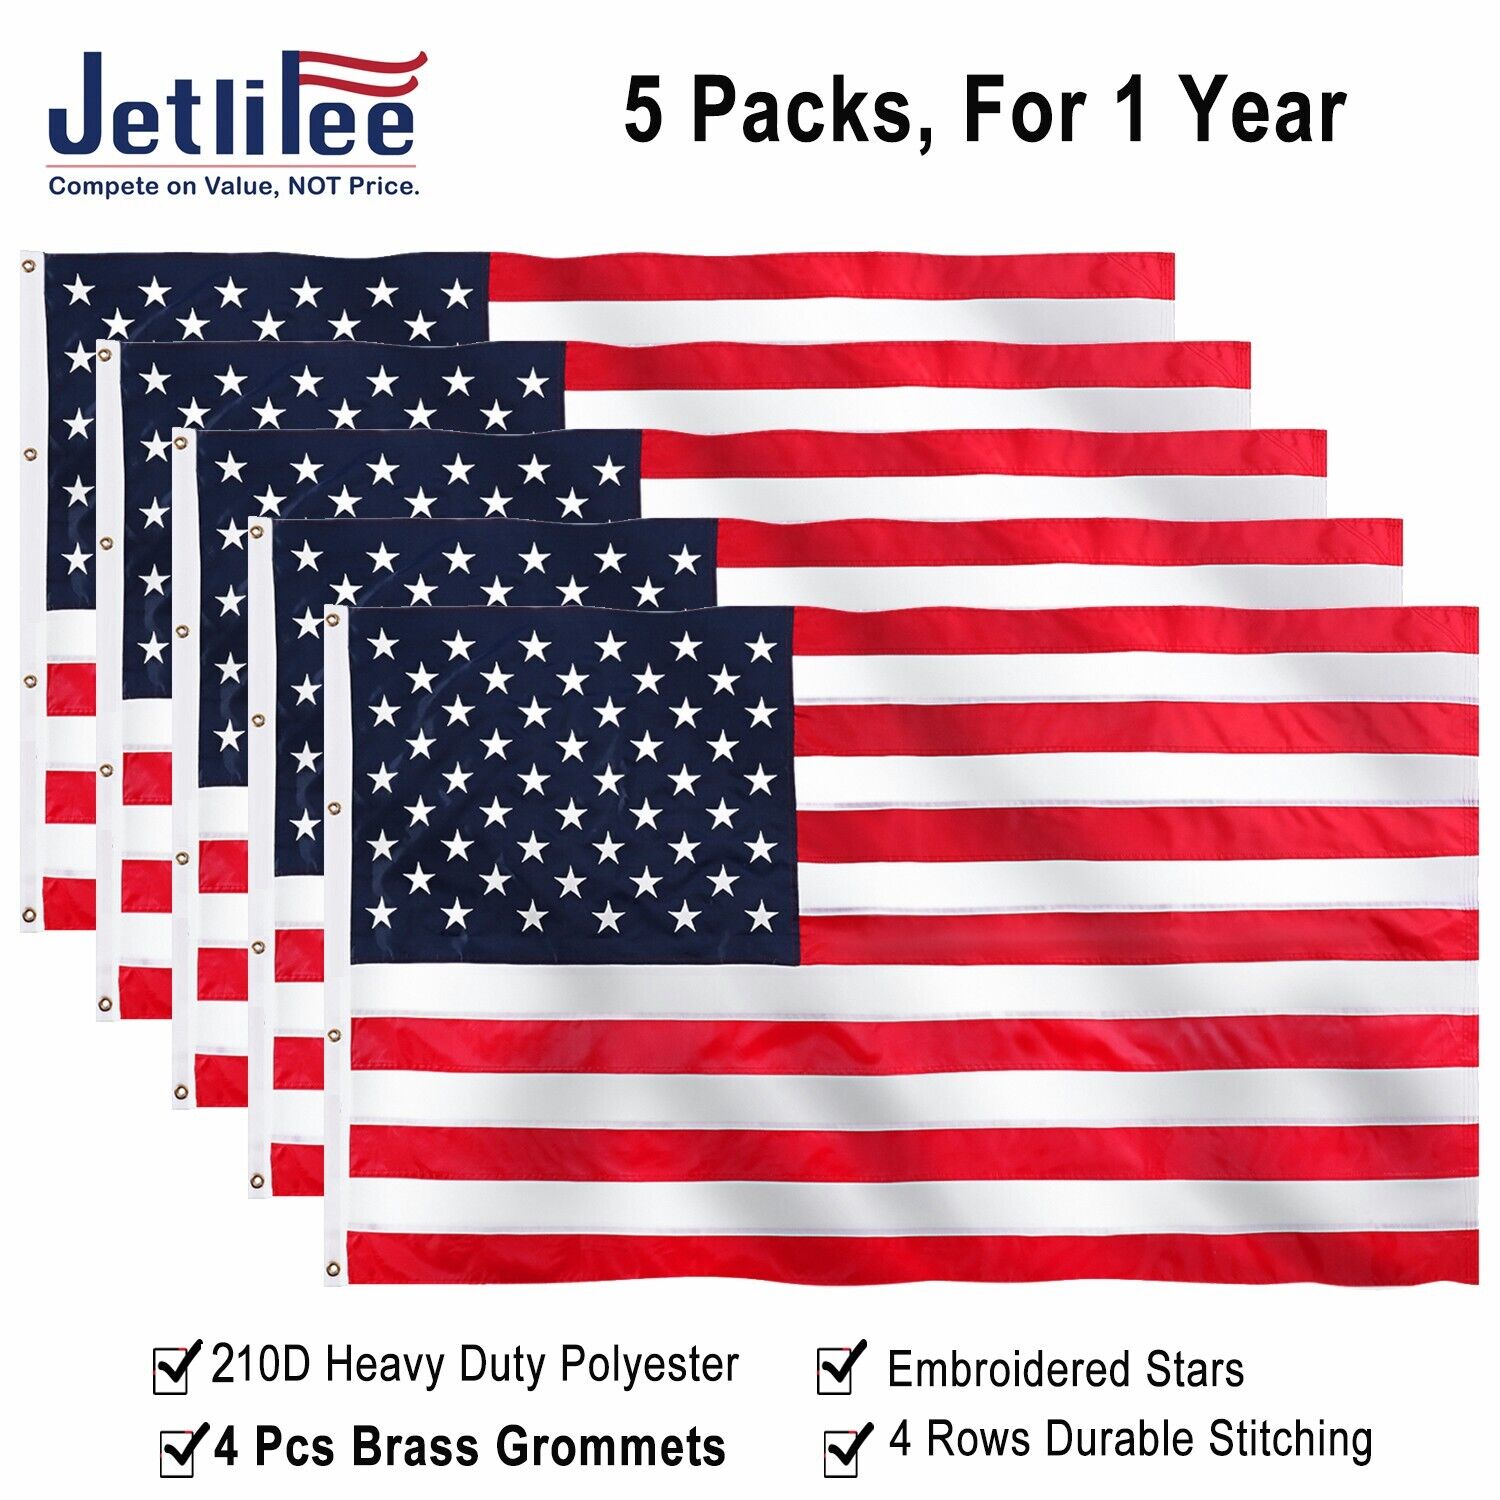 Jetlifee 5 Packs 8x12 FT American US Flag Banner Heavy Duty 210D Embroidered